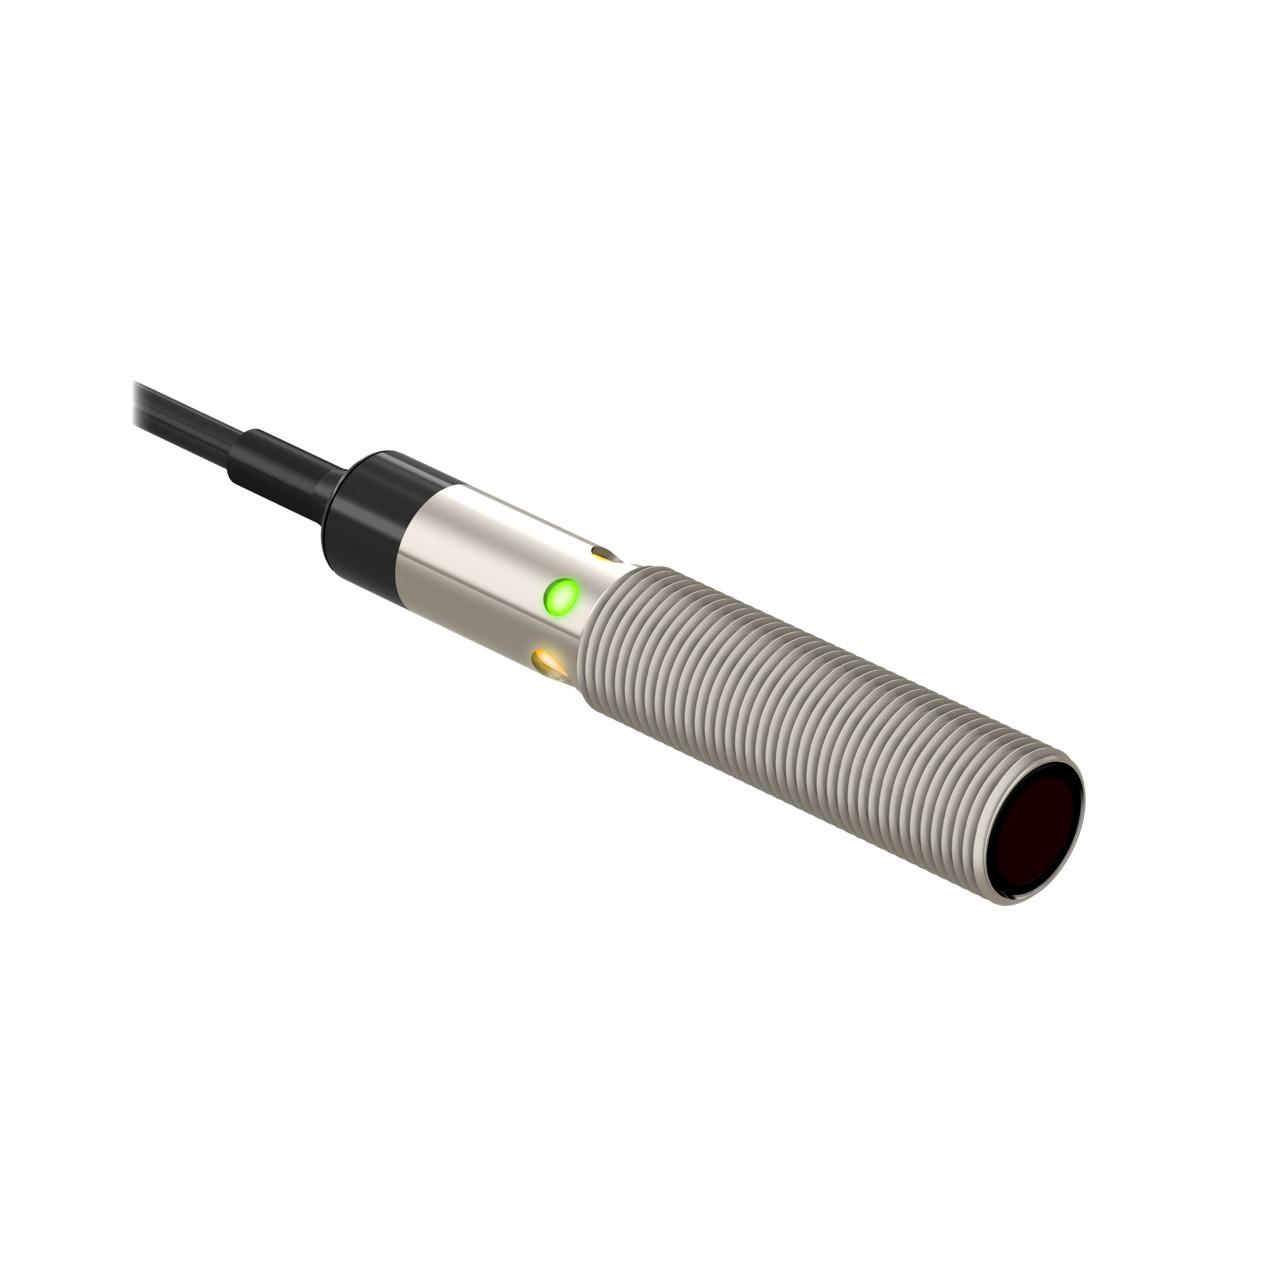 Banner M12E Photo-electric emitter with through-beam system / opposed mode - Banner Engineering (M12 barrel series - M12) - Part #77202 - Visible red light (660nm) - Supply voltage 10Vdc-30Vdc (12Vdc / 24Vdc nom.) - Pre-wired with 6.5ft / 2m cable terminated with bar